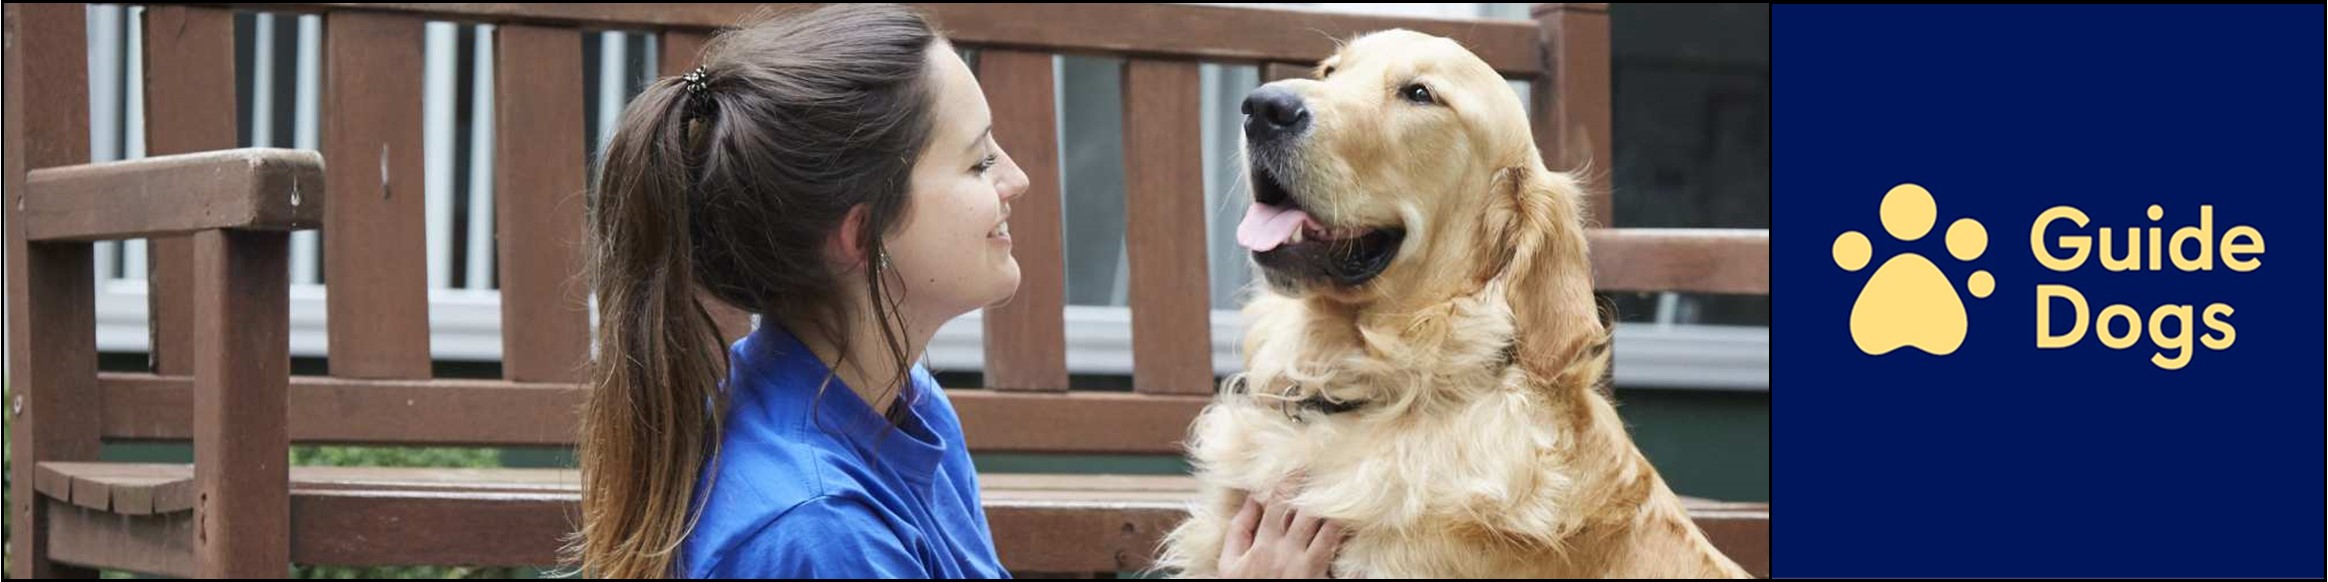 Guide Dogs Jobs, Careers and Vacancies. Volunteer Coordinator / Service Delivery Officer vacancy in Redbridge, Ilford, Essex Advertised by AWD online – Multi-Job Board Advertising and CV Sourcing Recruitment Services